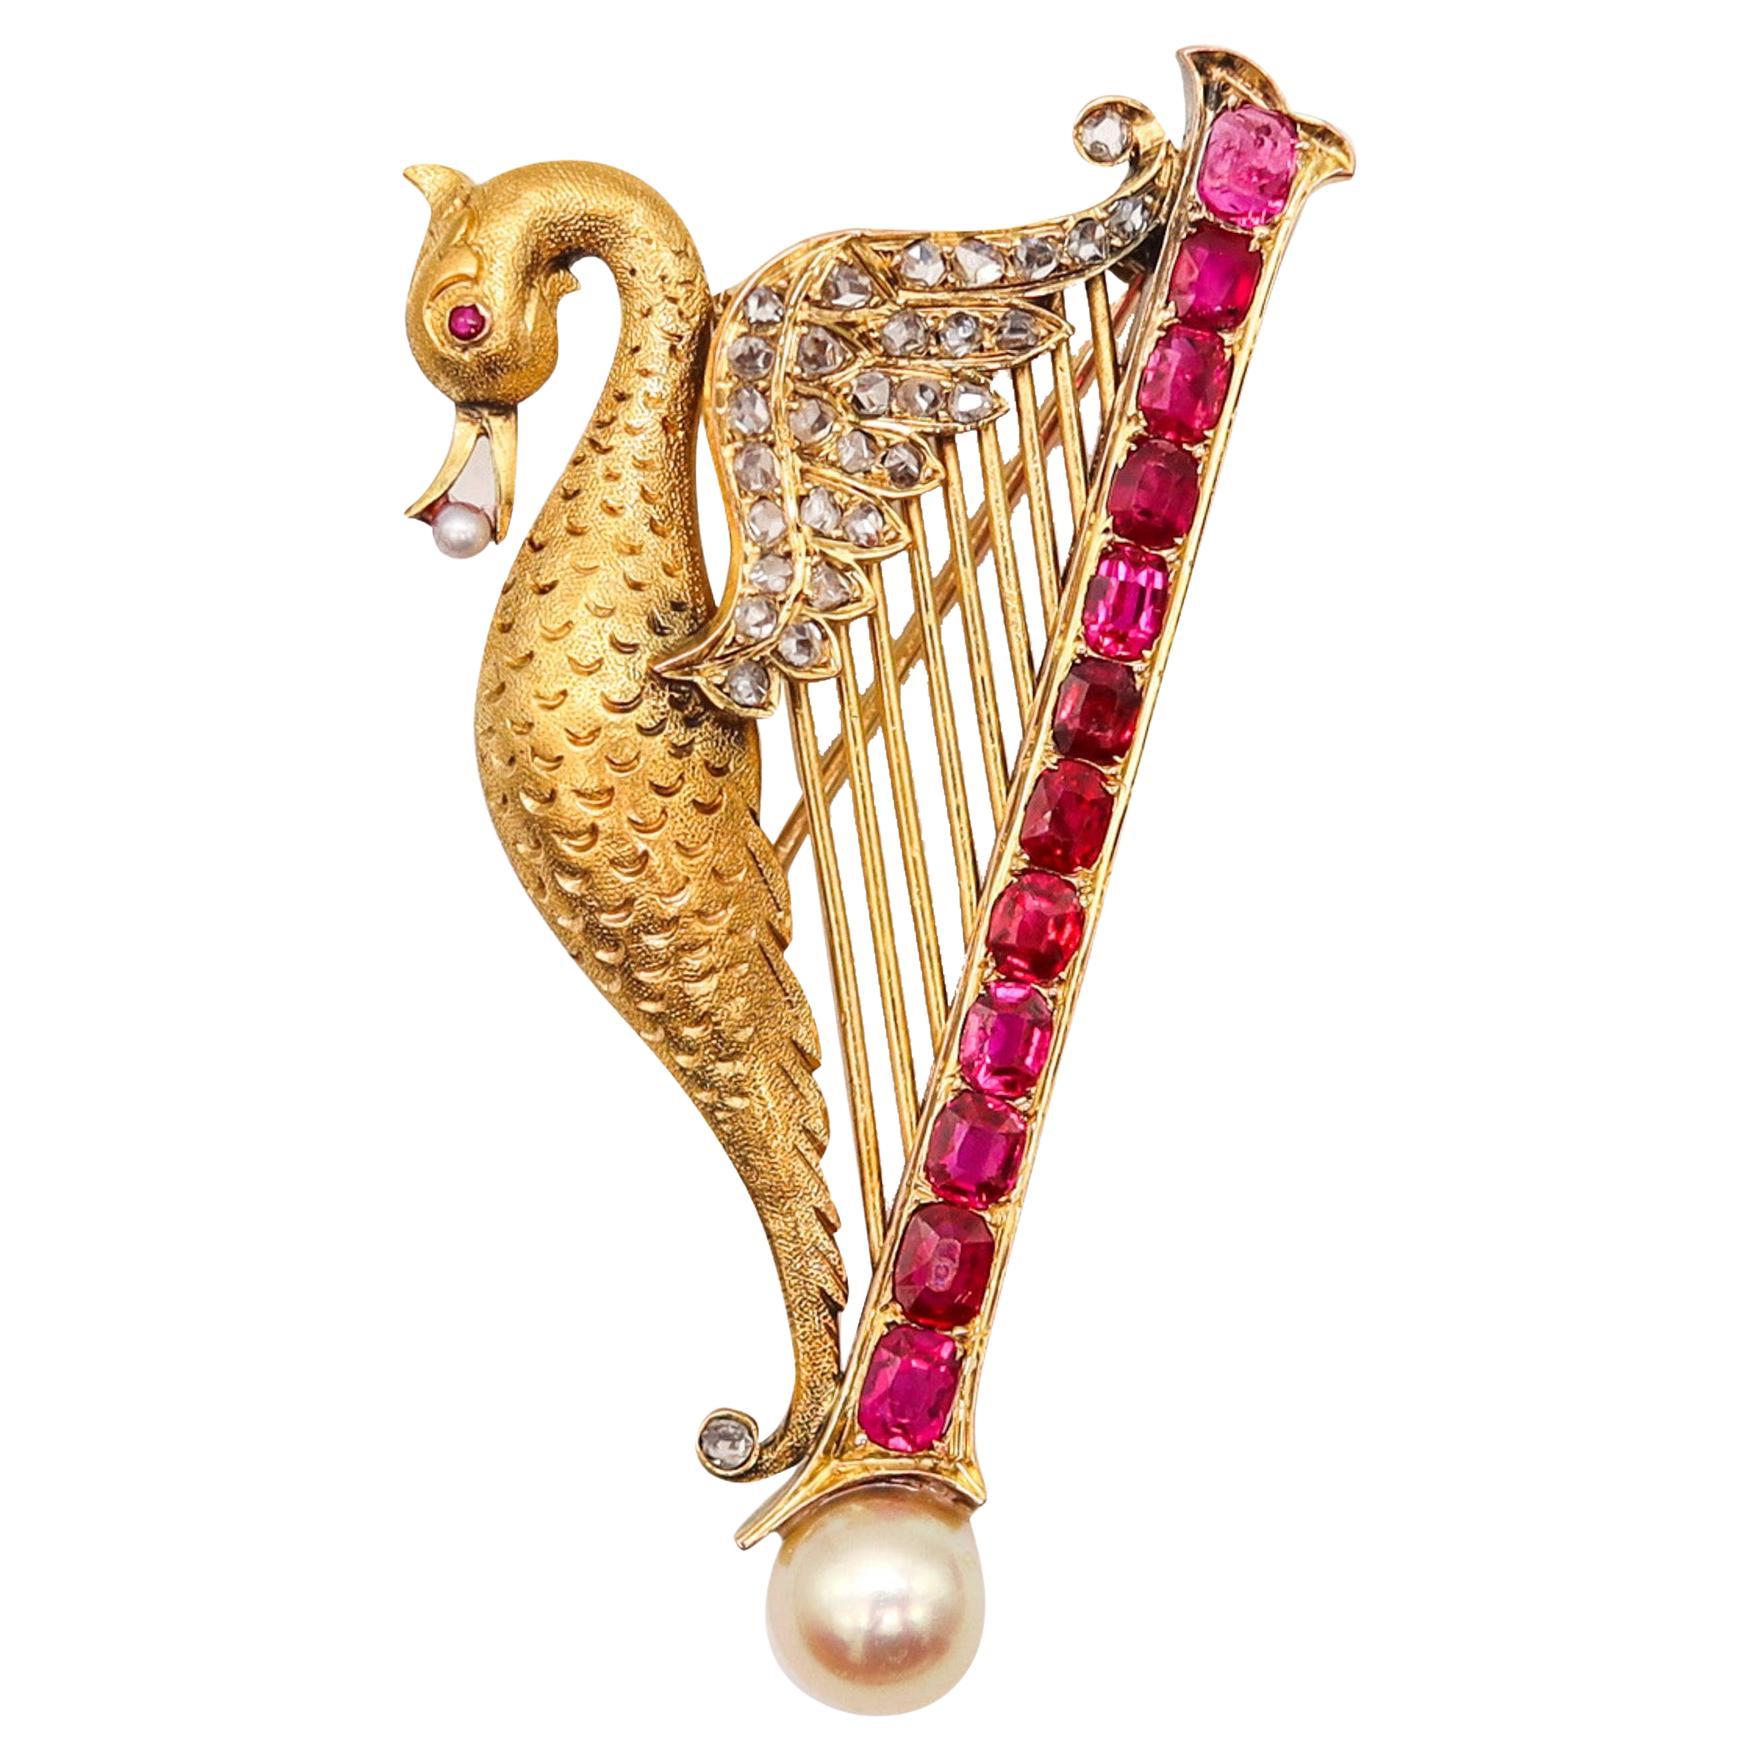 French 1890 Art Nouveau Swan Arp Brooch 18Kt Gold With 5.05 Ctw Rubies Diamonds For Sale